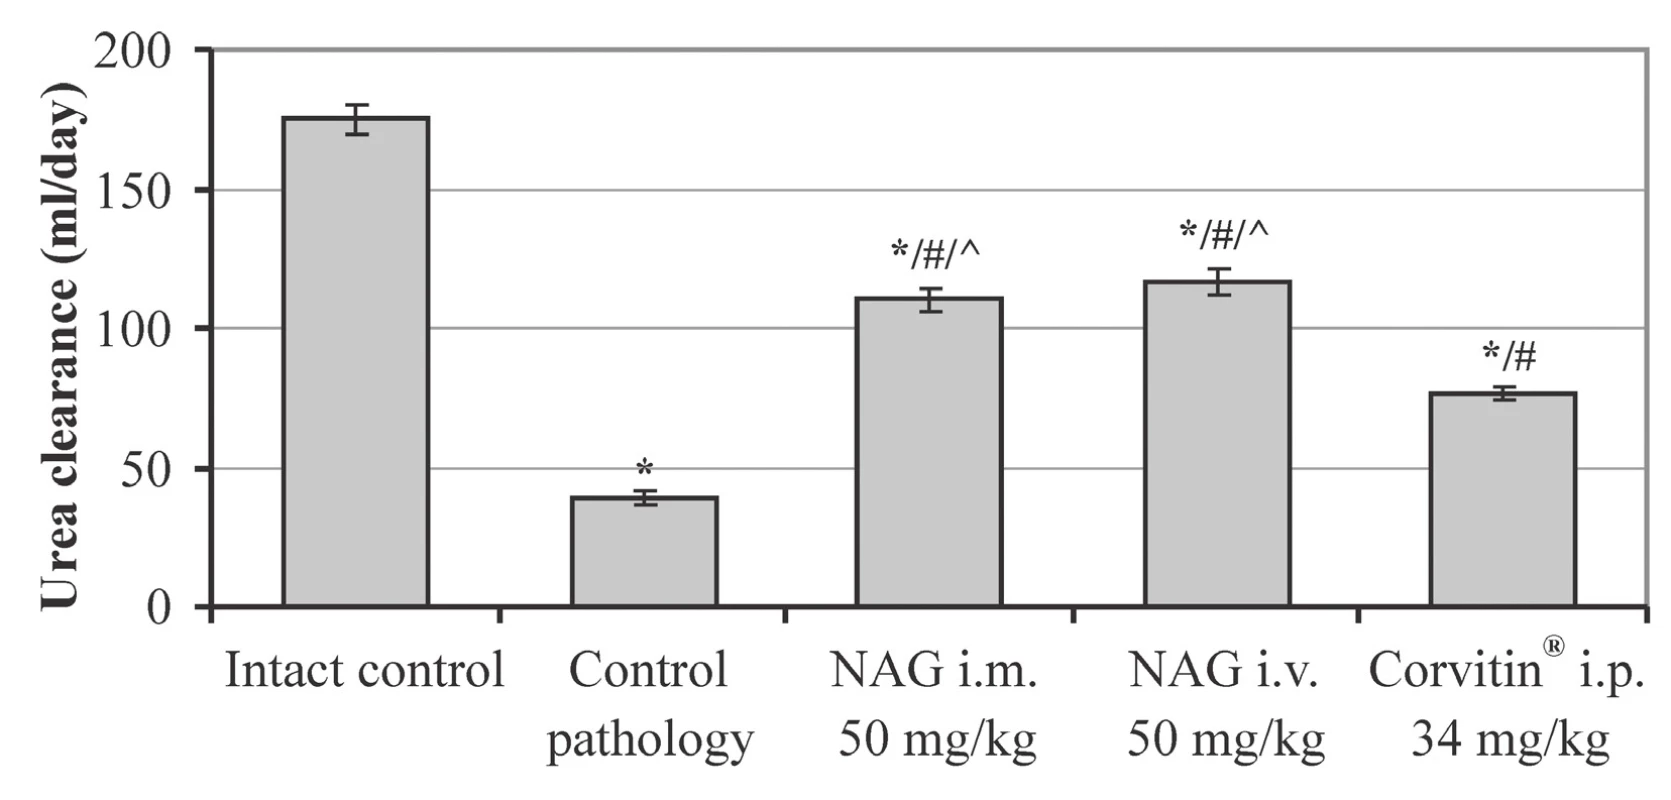 The influence of NAG on the urea clearance in rats with AKI (M ± SE, n = 48)<br>
* significant relative to the intact control group (p < 0.05)<br>
# significant relative to the control pathology group (p < 0.05)<br>
^ significant relative to the animals treated with Corvitin® (p < 0.05)
n – number of animals in the experiment